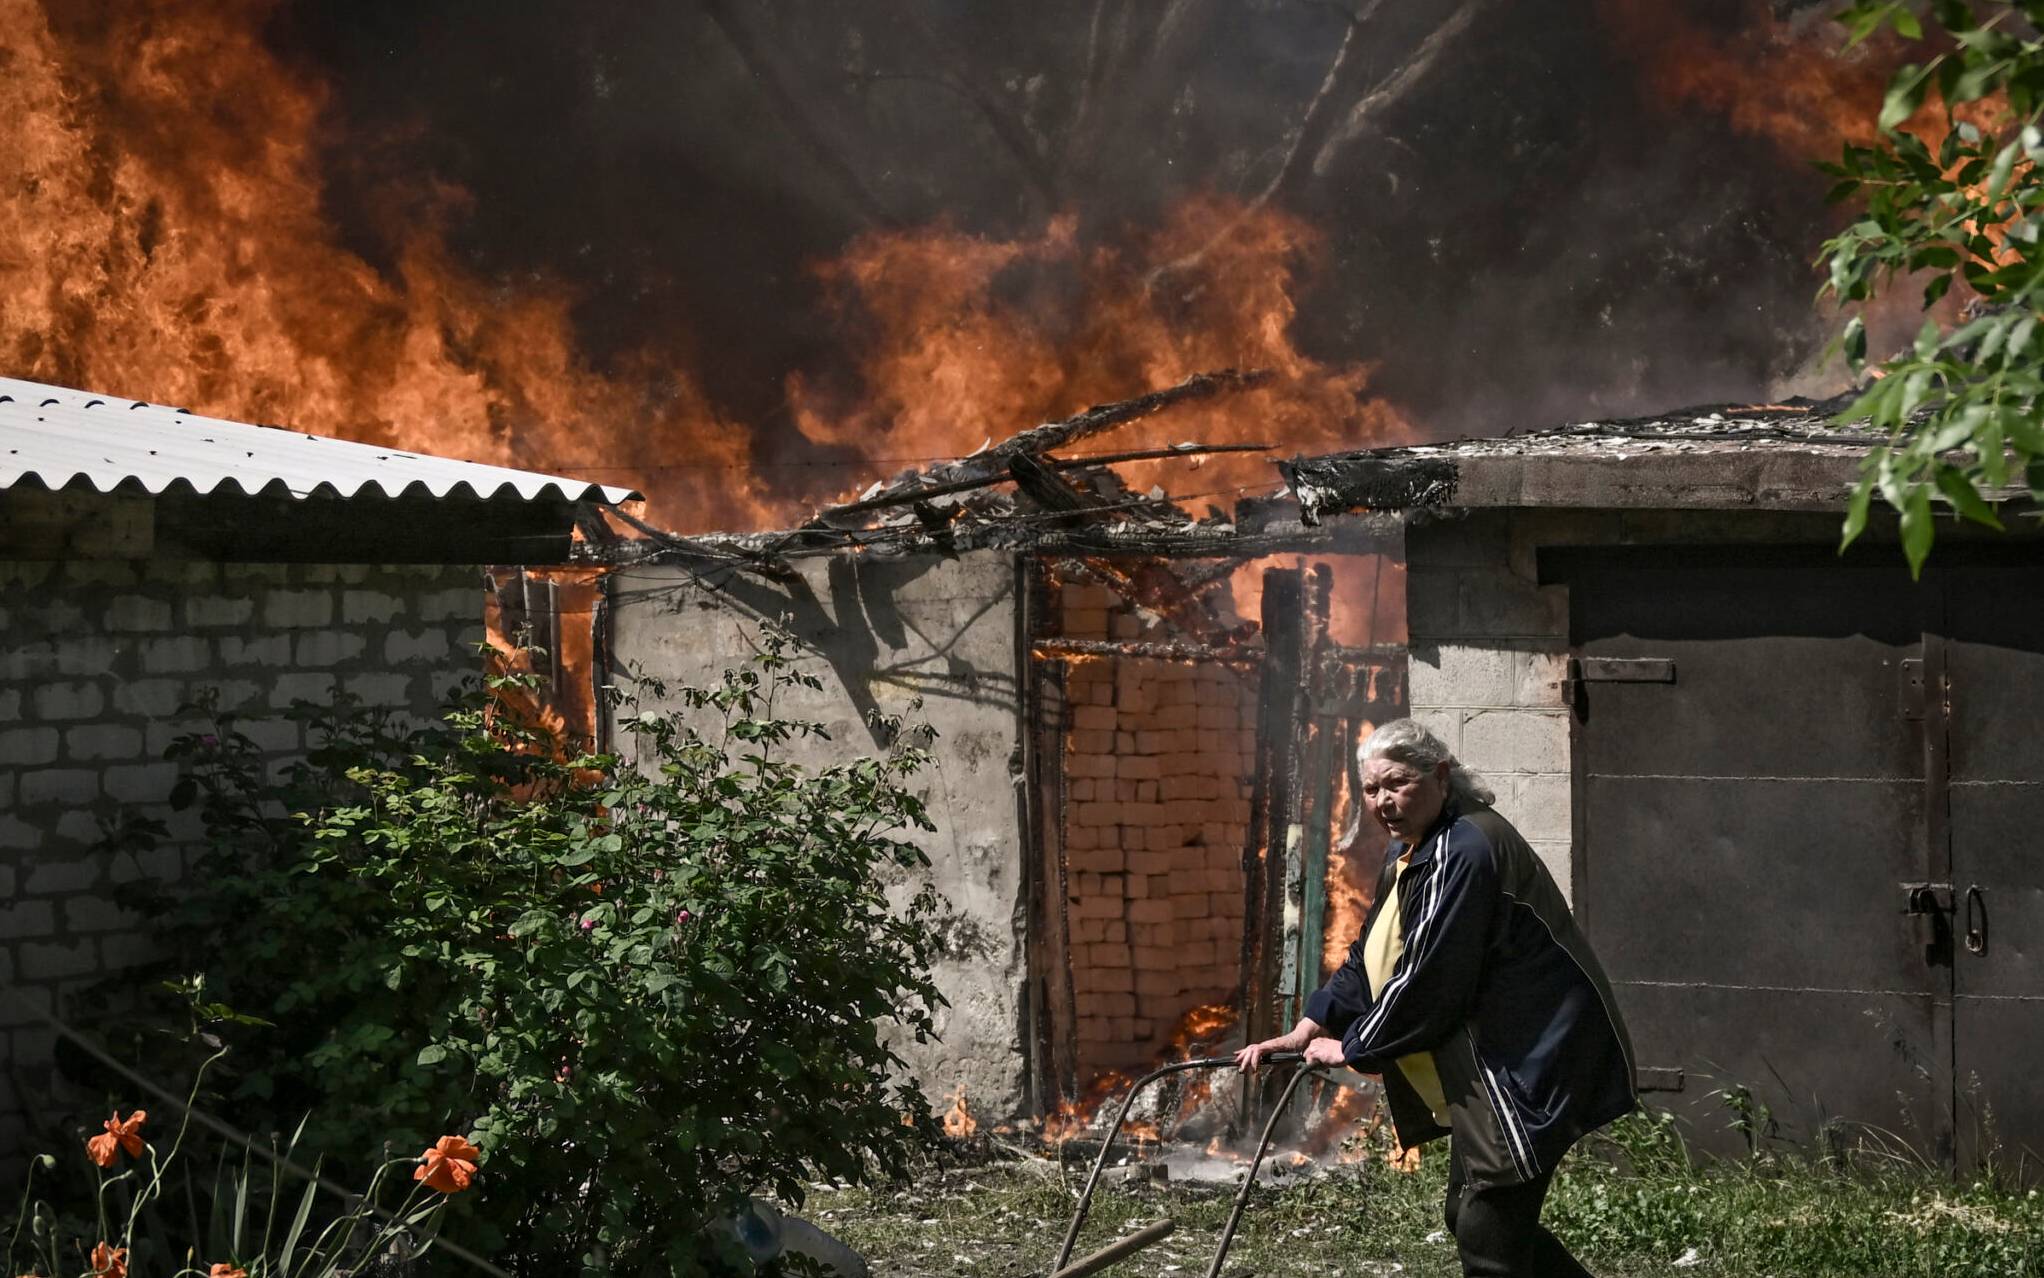 An elderly woman walks away from a burning house garage after shelling in the city of Lysytsansk at the eastern Ukrainian region of Donbas on May 30, 2022, on the 96th day of the Russian invasion of Ukraine. - Since failing to capture Kyiv in the war's early stages, Russia's army has narrowed its focus, hammering Donbas cities with artillery and missile barrages as it seeks to consolidate its control. (Photo by ARIS MESSINIS / AFP)